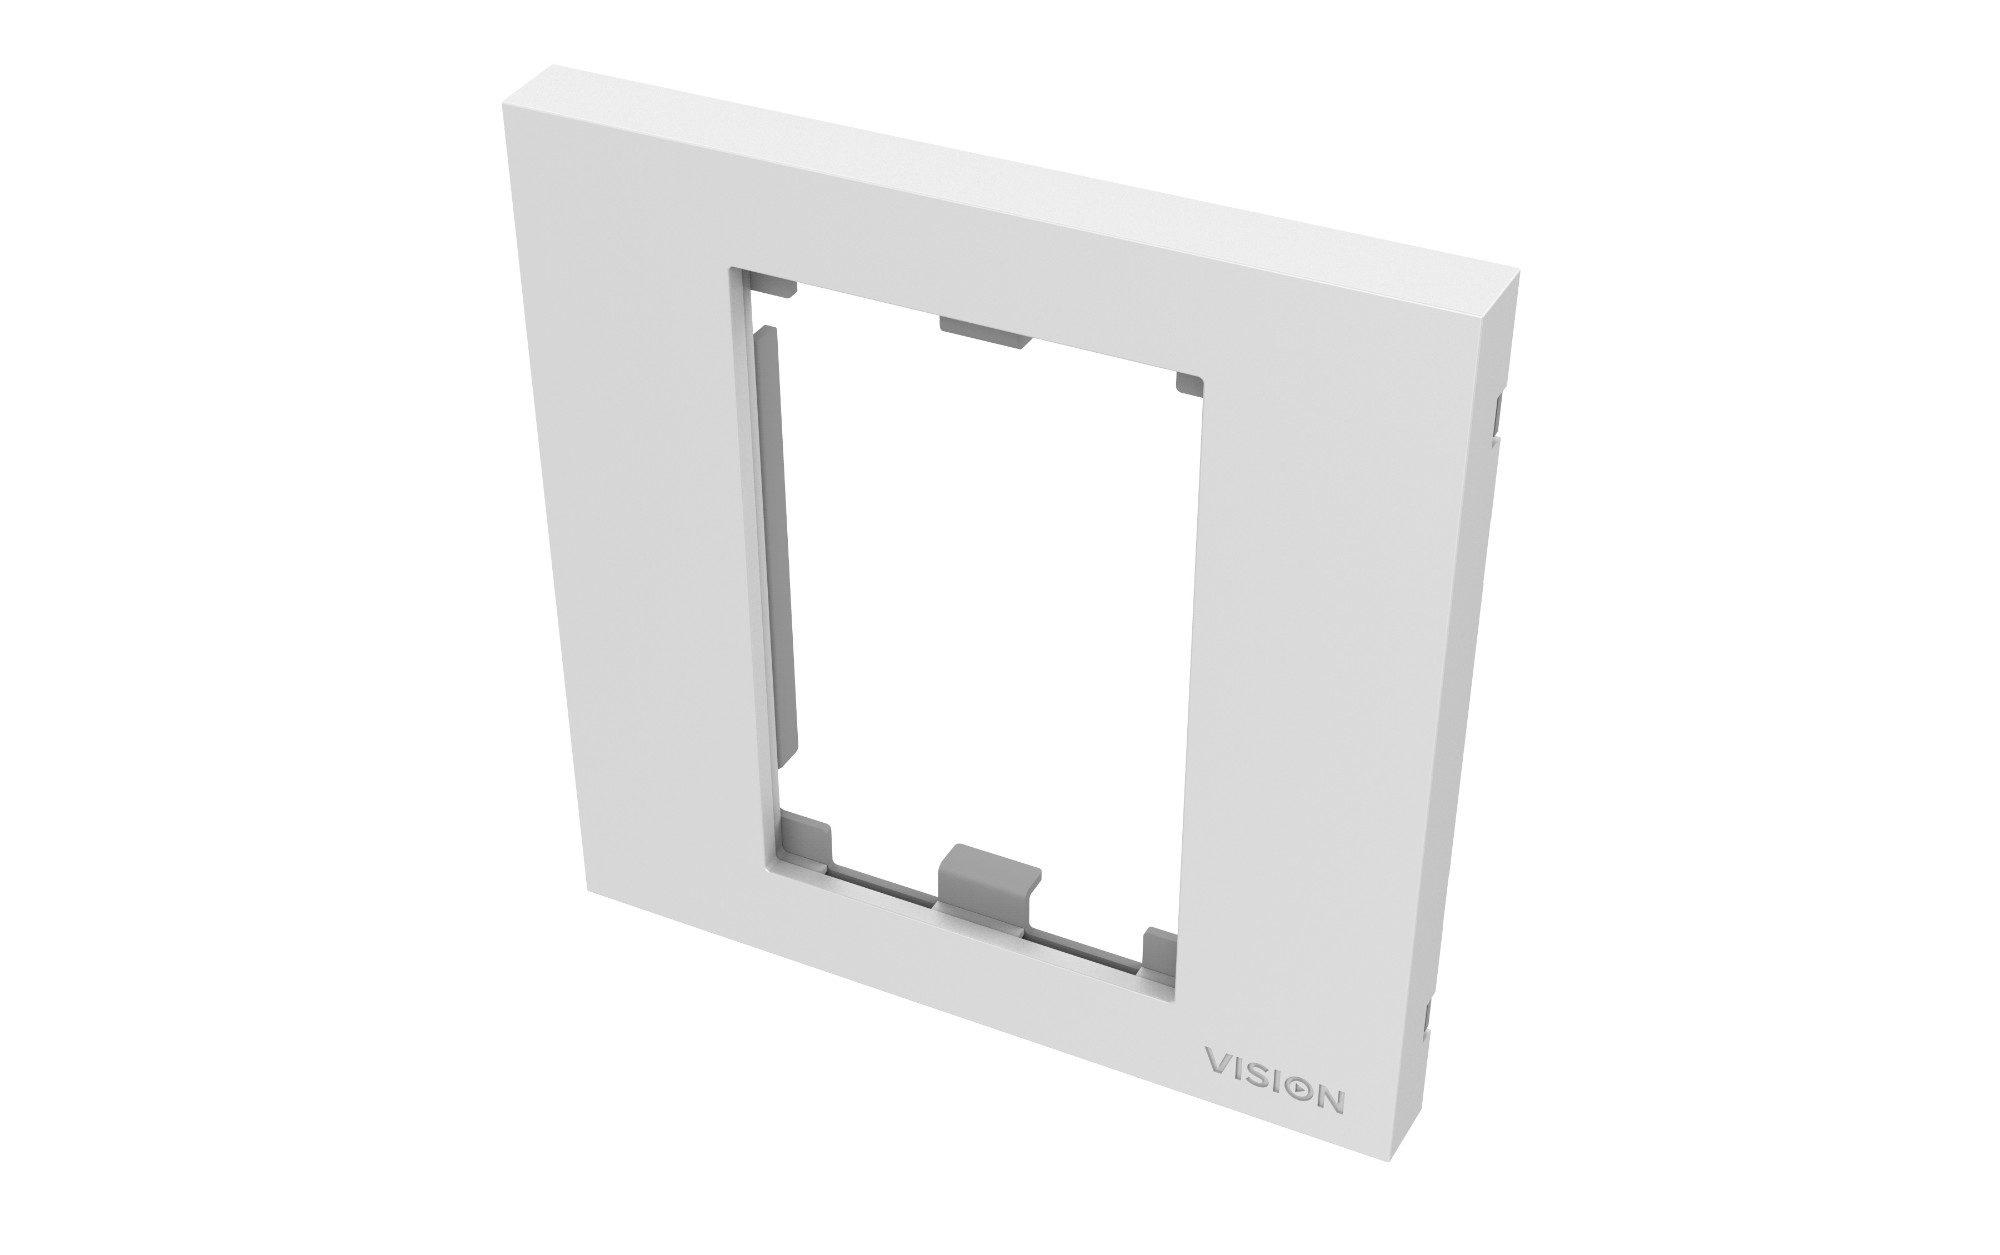 TC3 SURR1G VISION Techconnect Modular AV Faceplate - LIFETIME WARRANTY - Single-Gang UK surround - frame which accommodates two modules - fits to TC3 BACKBOX1G or TC3 MUDRING1G, or any standard single-gang UK backbox (pattress) - 86 x 86 mm / 3.4 x 3.4